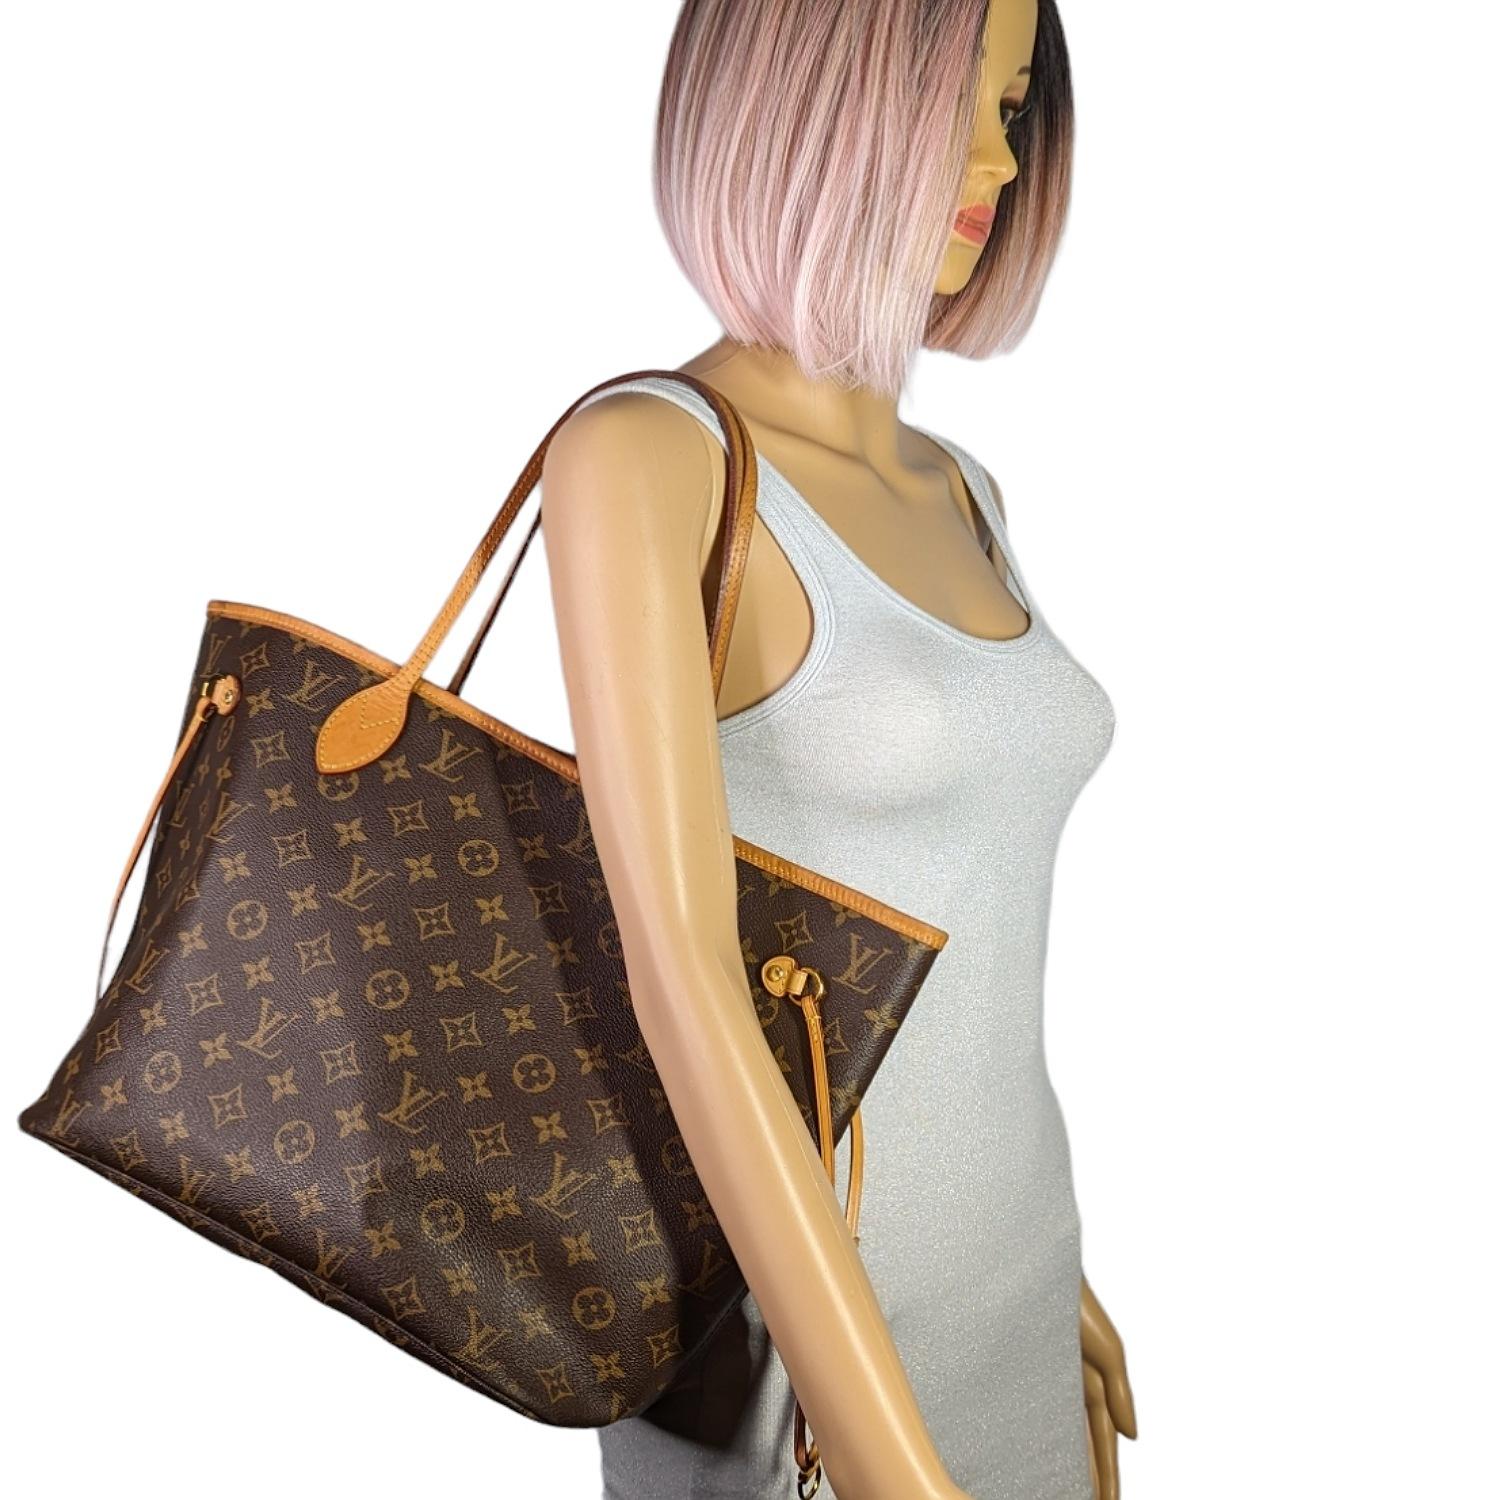 This stylish tote is crafted of classic Louis Vuitton monogram on coated canvas. It features vachetta cowhide leather trim, shoulder straps, and side cinch cords. The top is open to a fabric interior with a hanging zipper pocket. Retail price